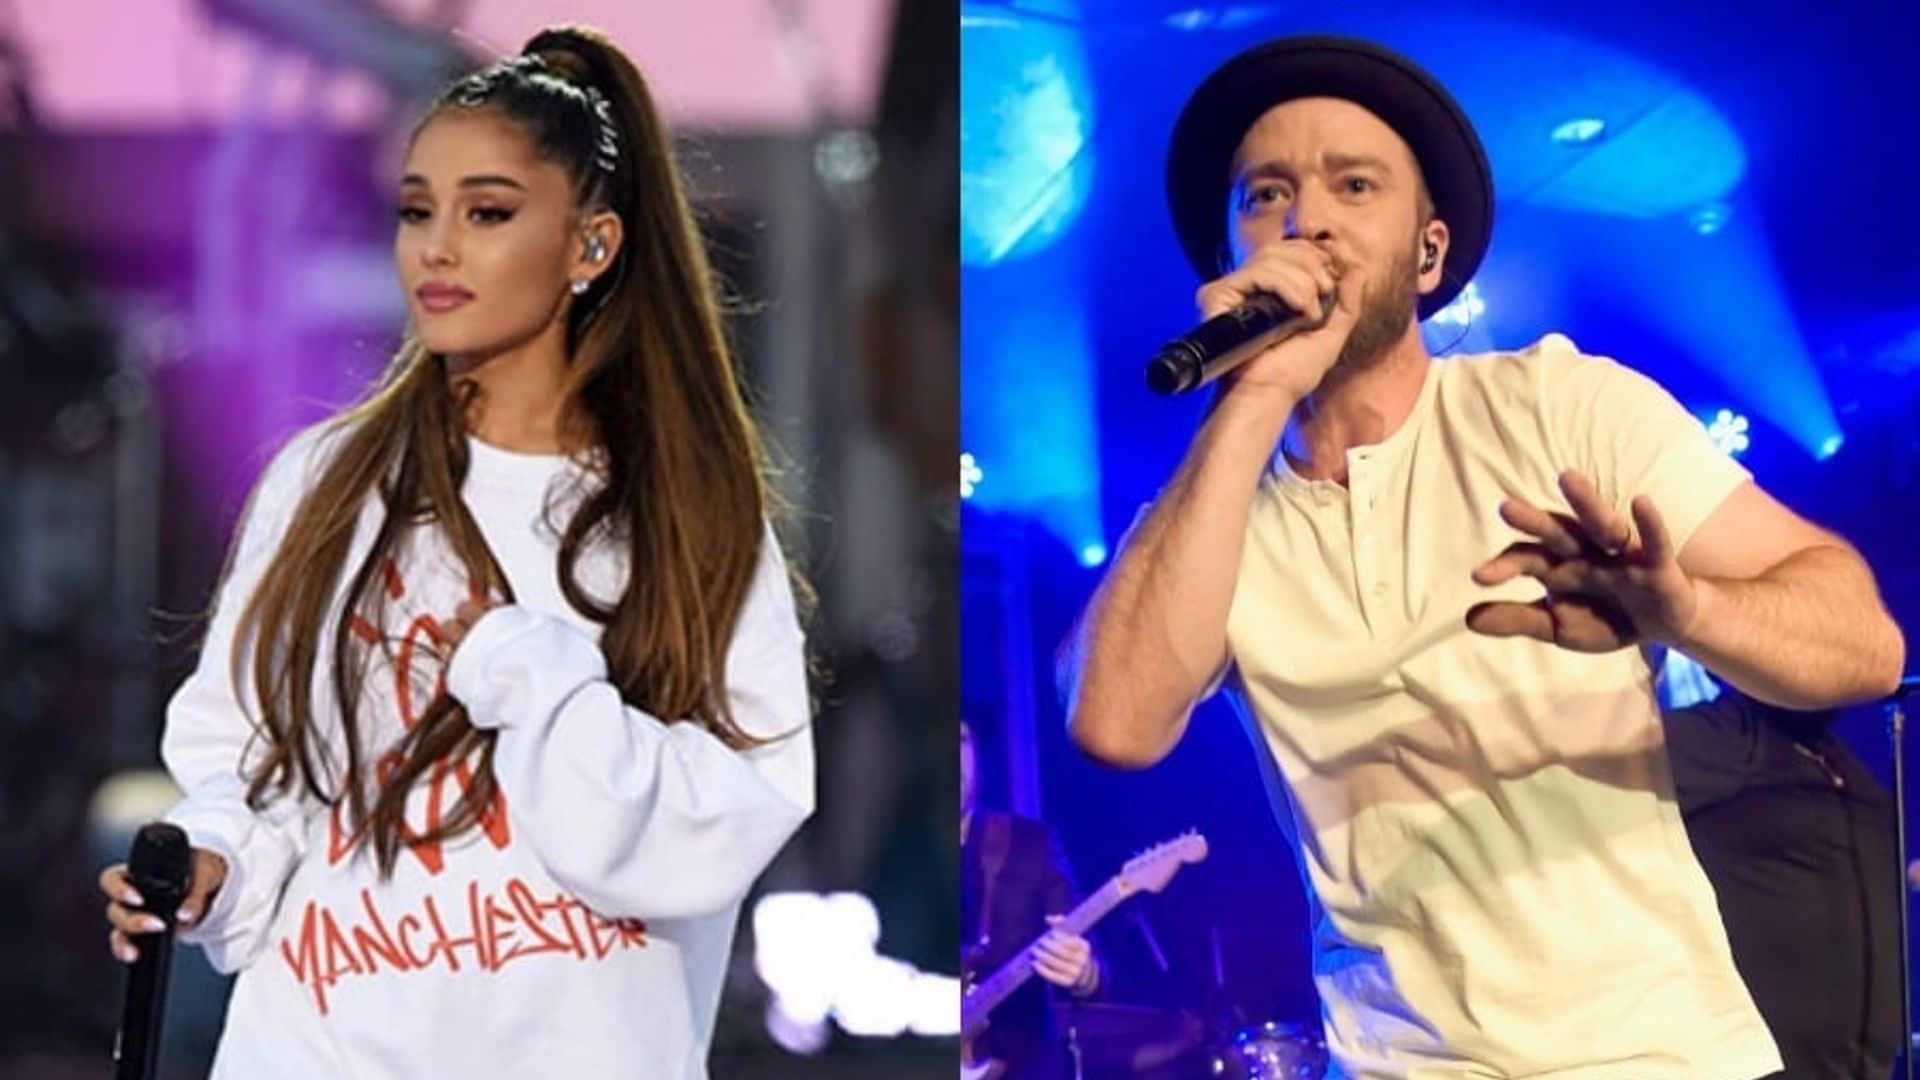 Justin Timberlake, Ariana Grande and more to perform free concert for Charlottesville victims